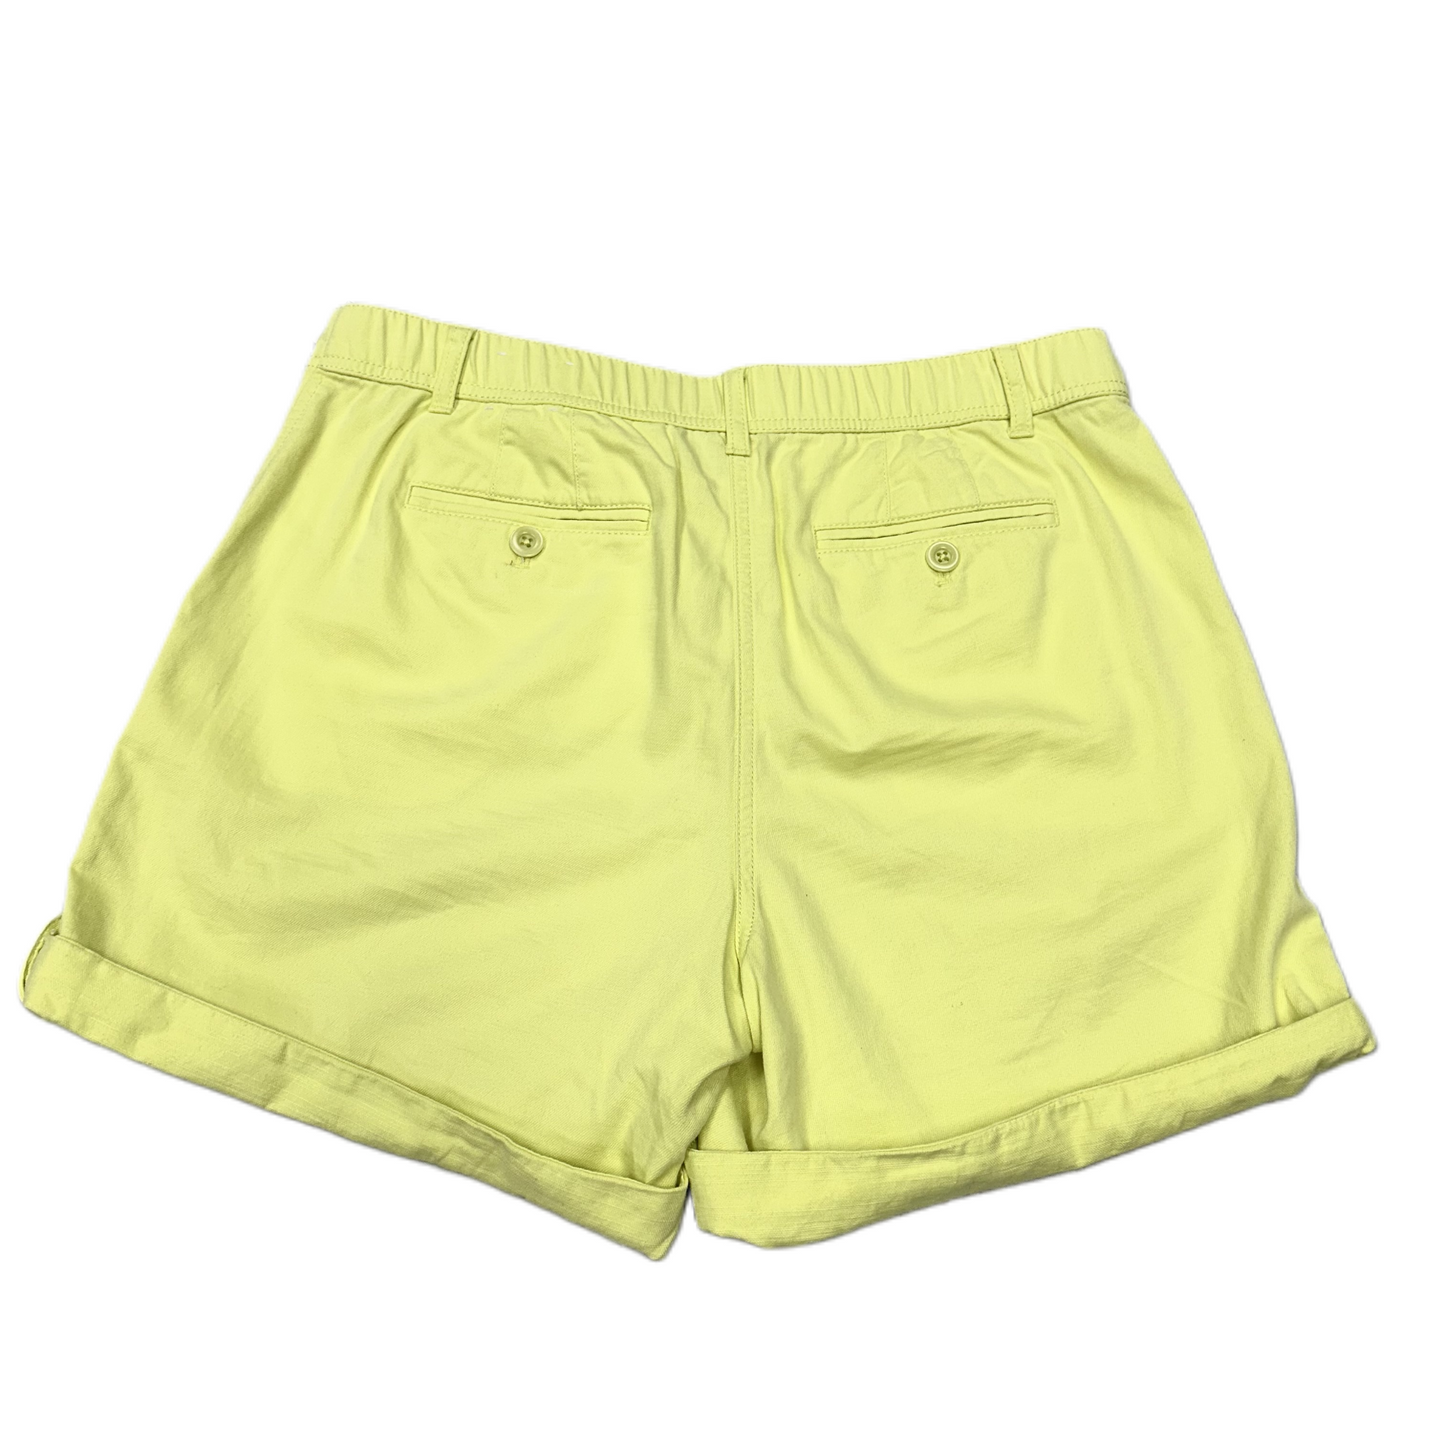 Yellow Shorts By Talbots, Size: 12